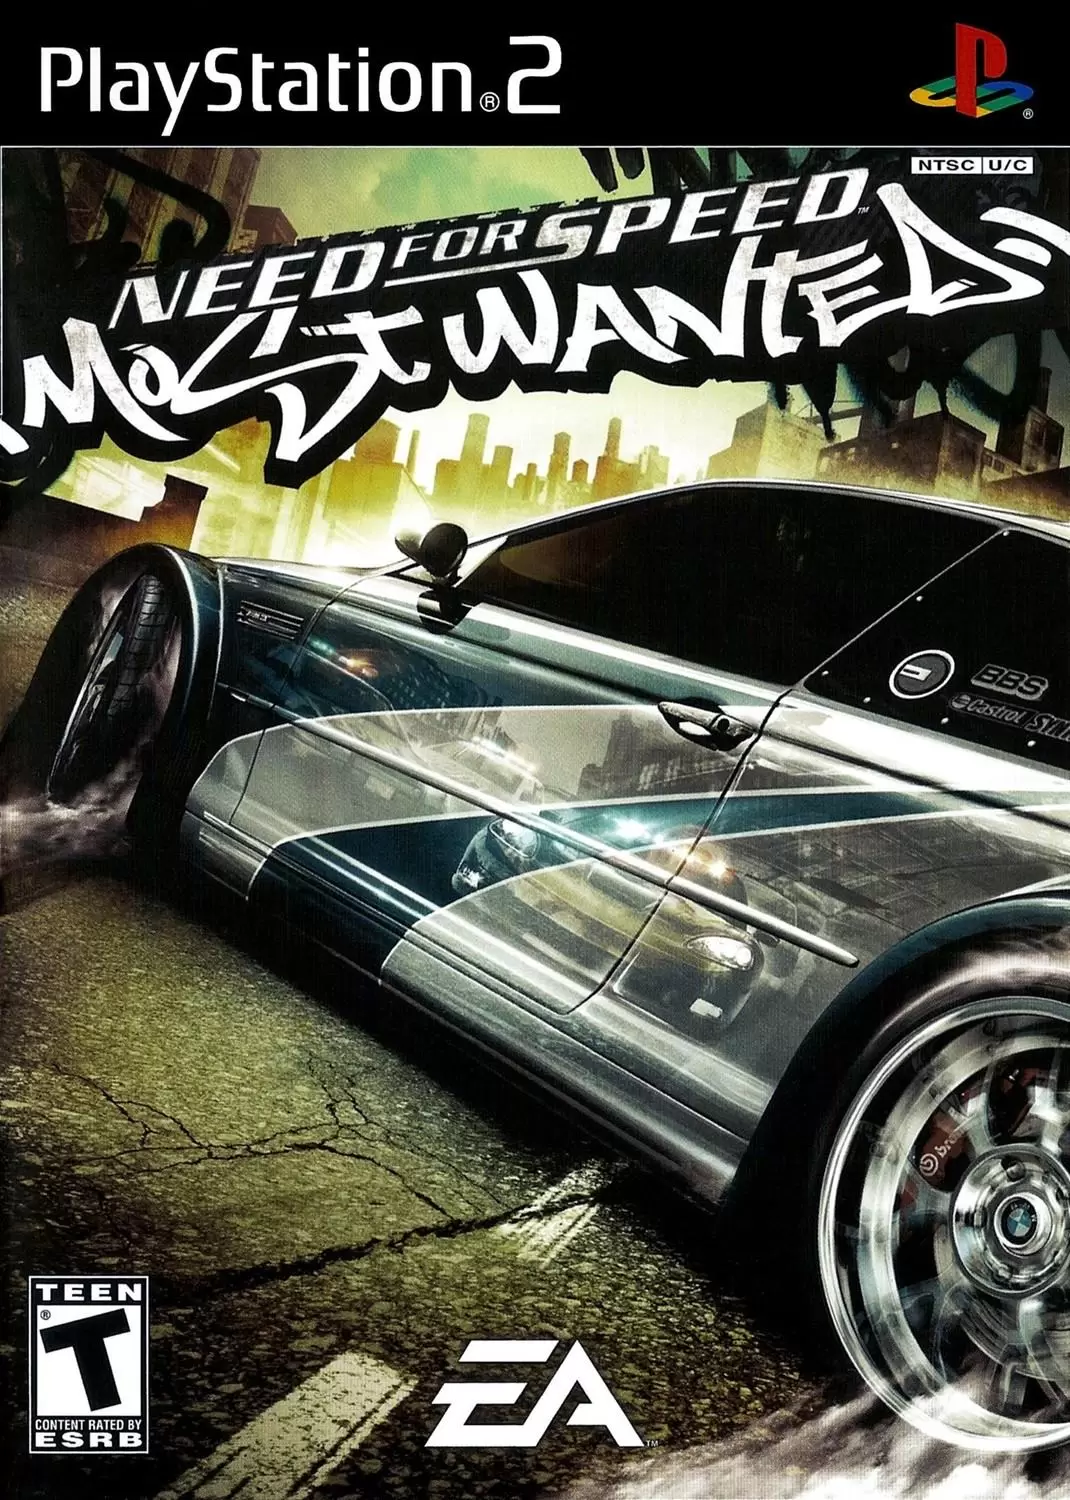 PS2 Games - Need for Speed: Most Wanted